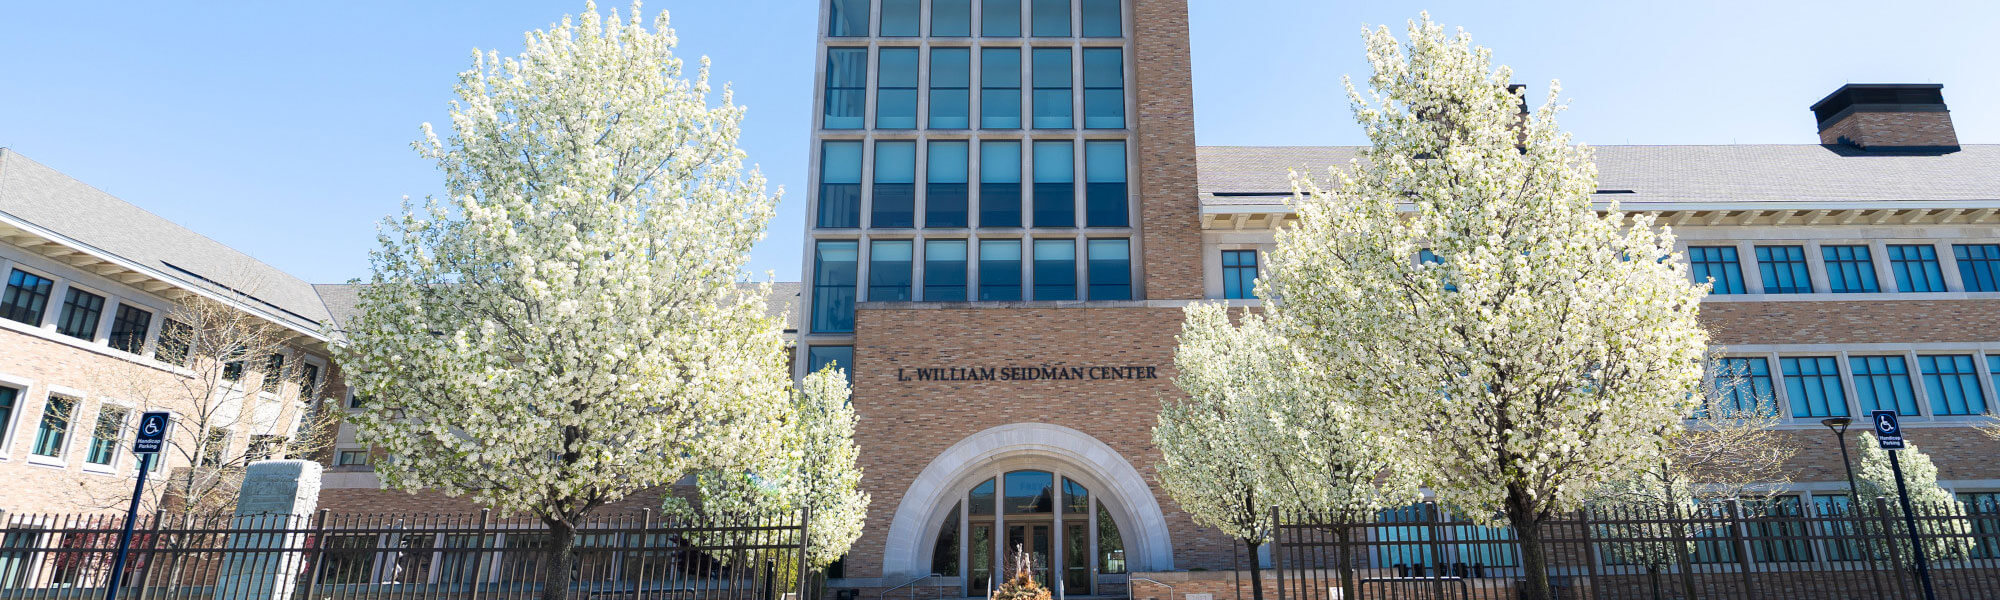 Image of the L. William Seidman Center at Grand Valley State University.